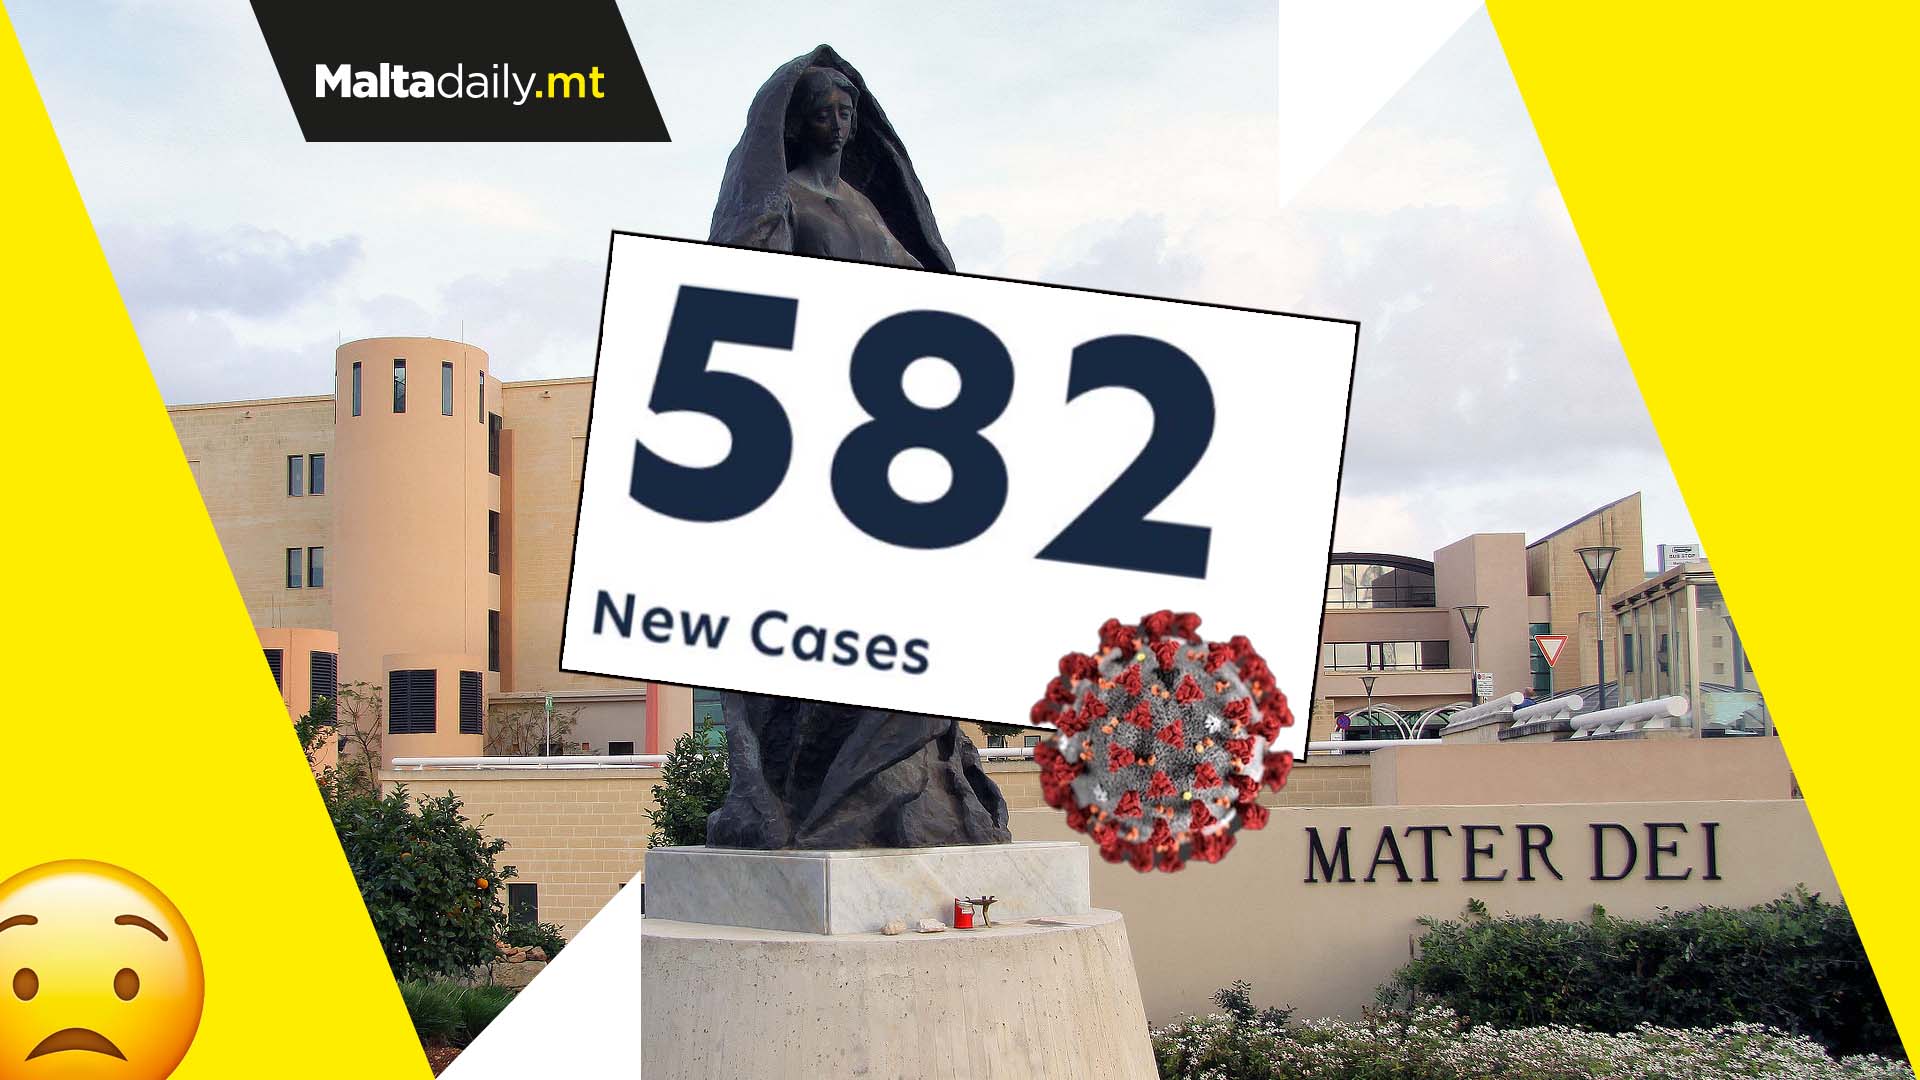 Malta registers the highest number of daily cases at 582